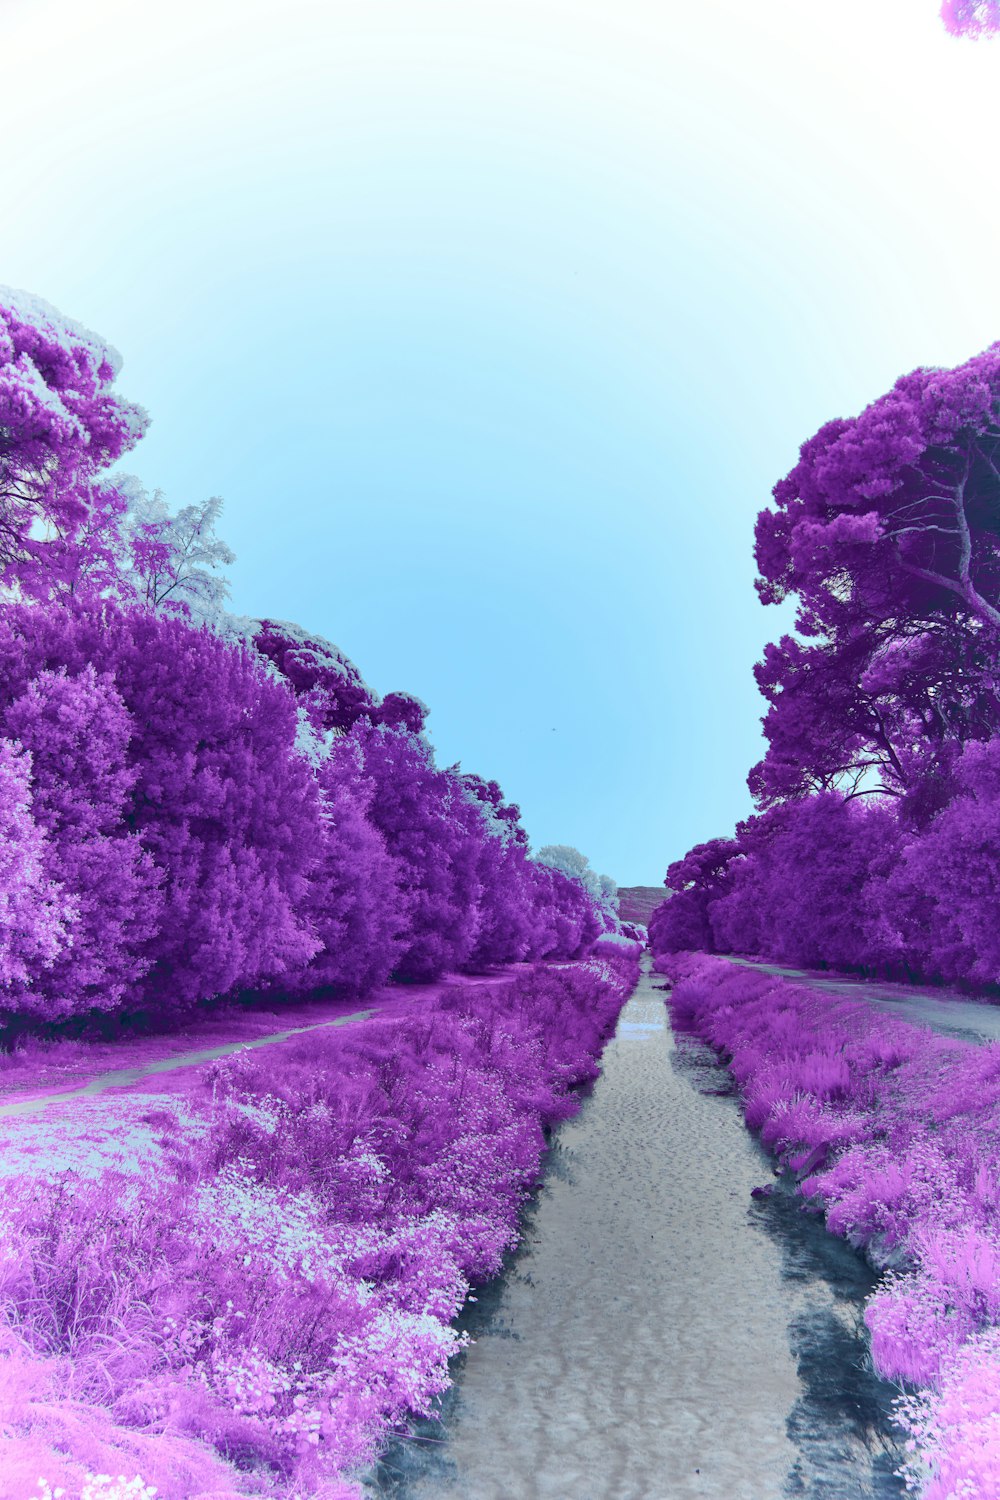 a purple landscape with trees and a path